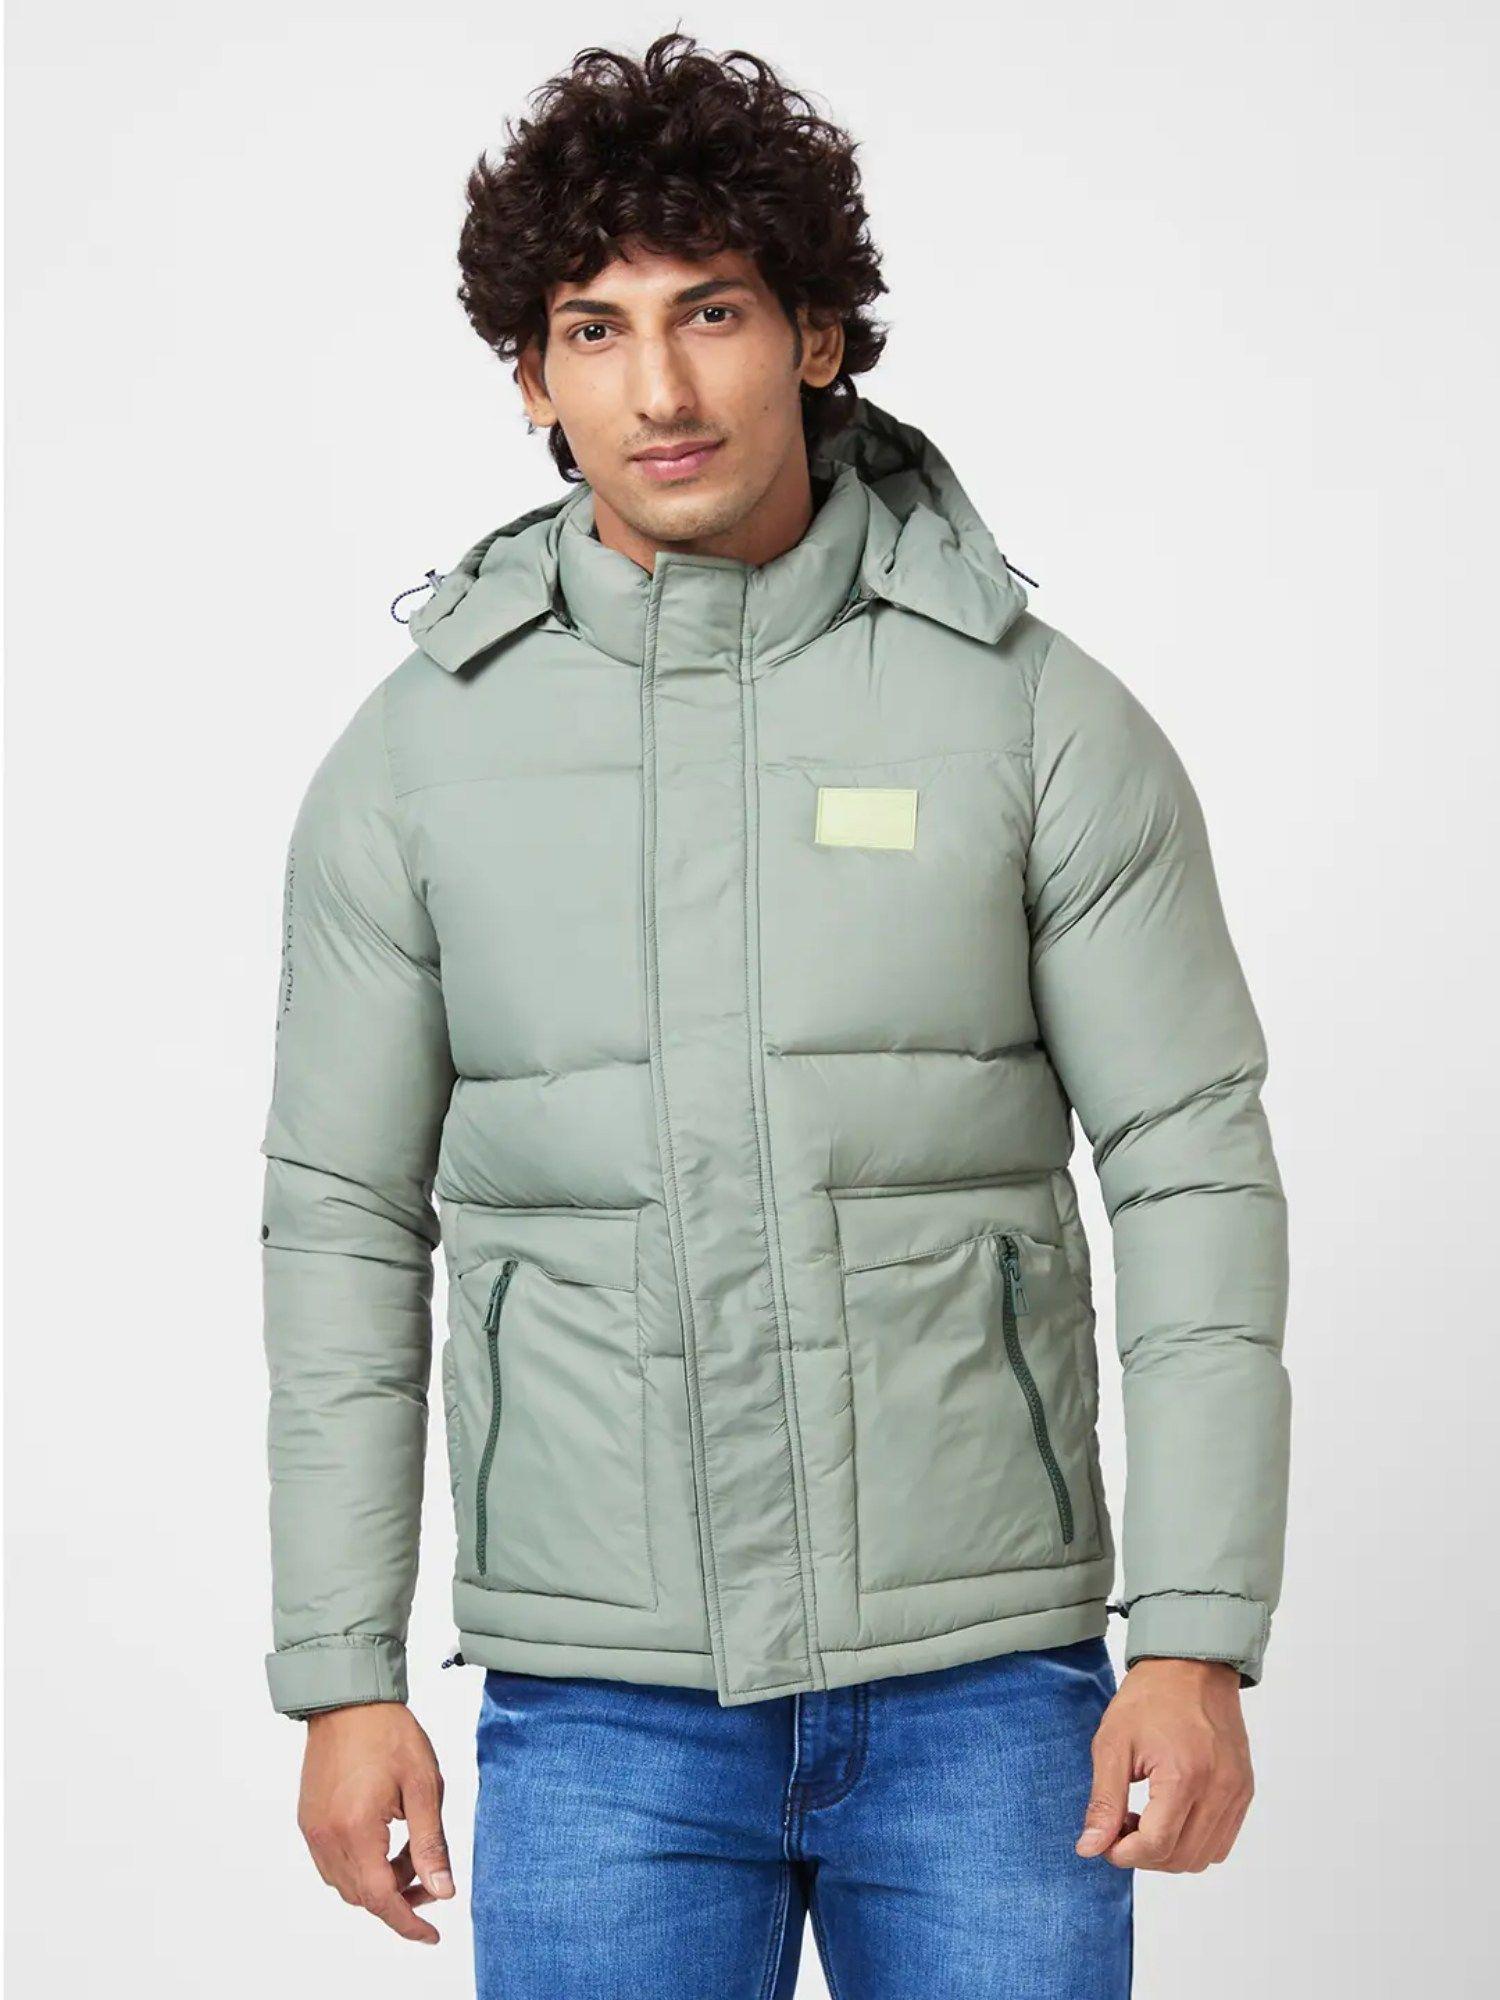 men's-puffer-jacket-with-zipper-patch-pocket-&-printed-details-on-sleeves